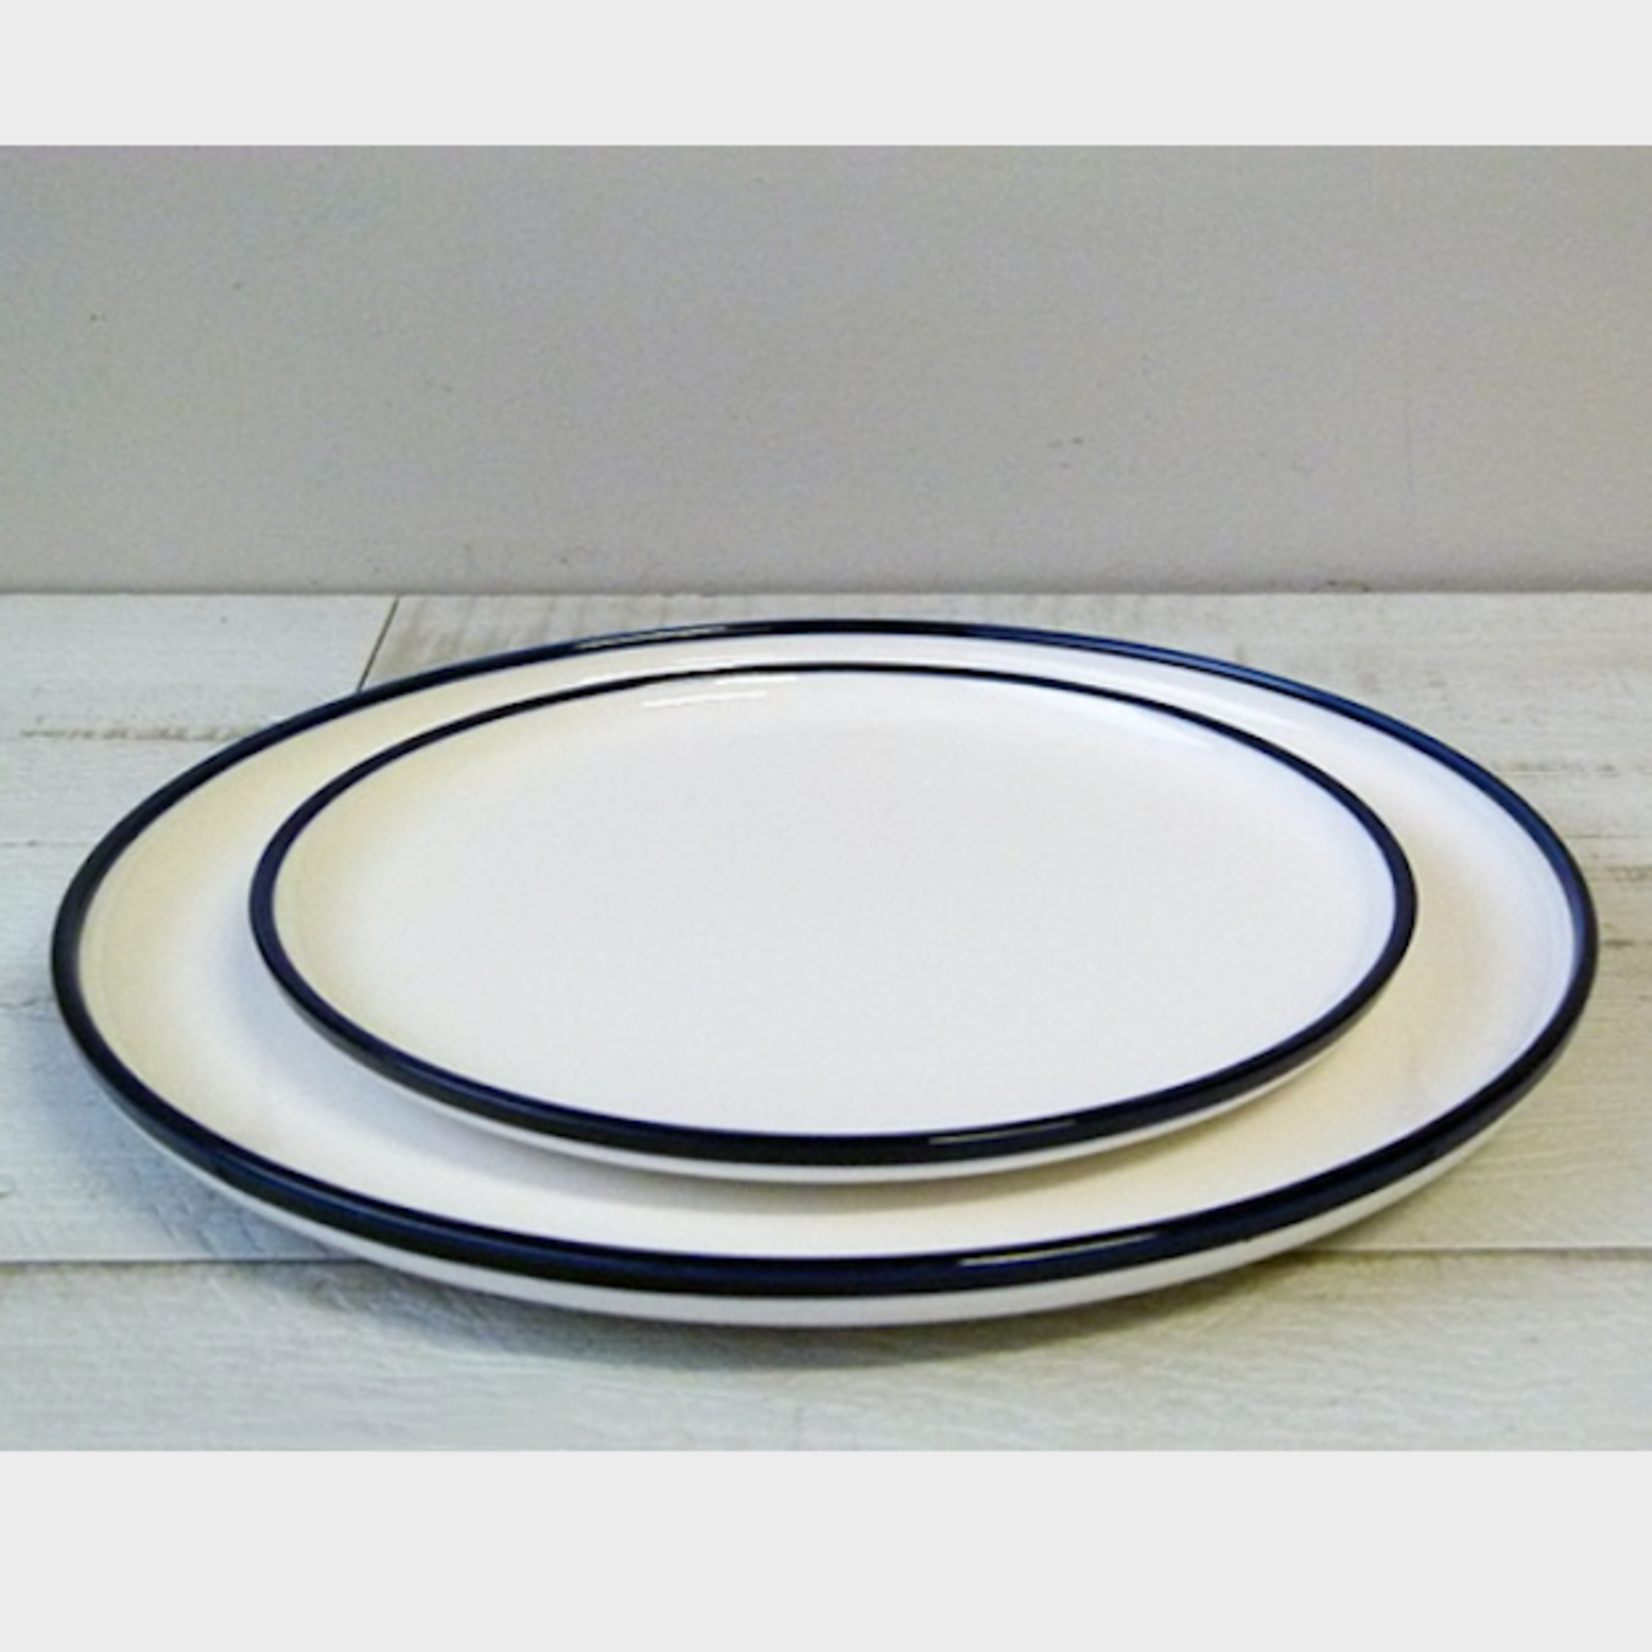 CHEHOMA SMALL PLATE WITH BLUE EDGE